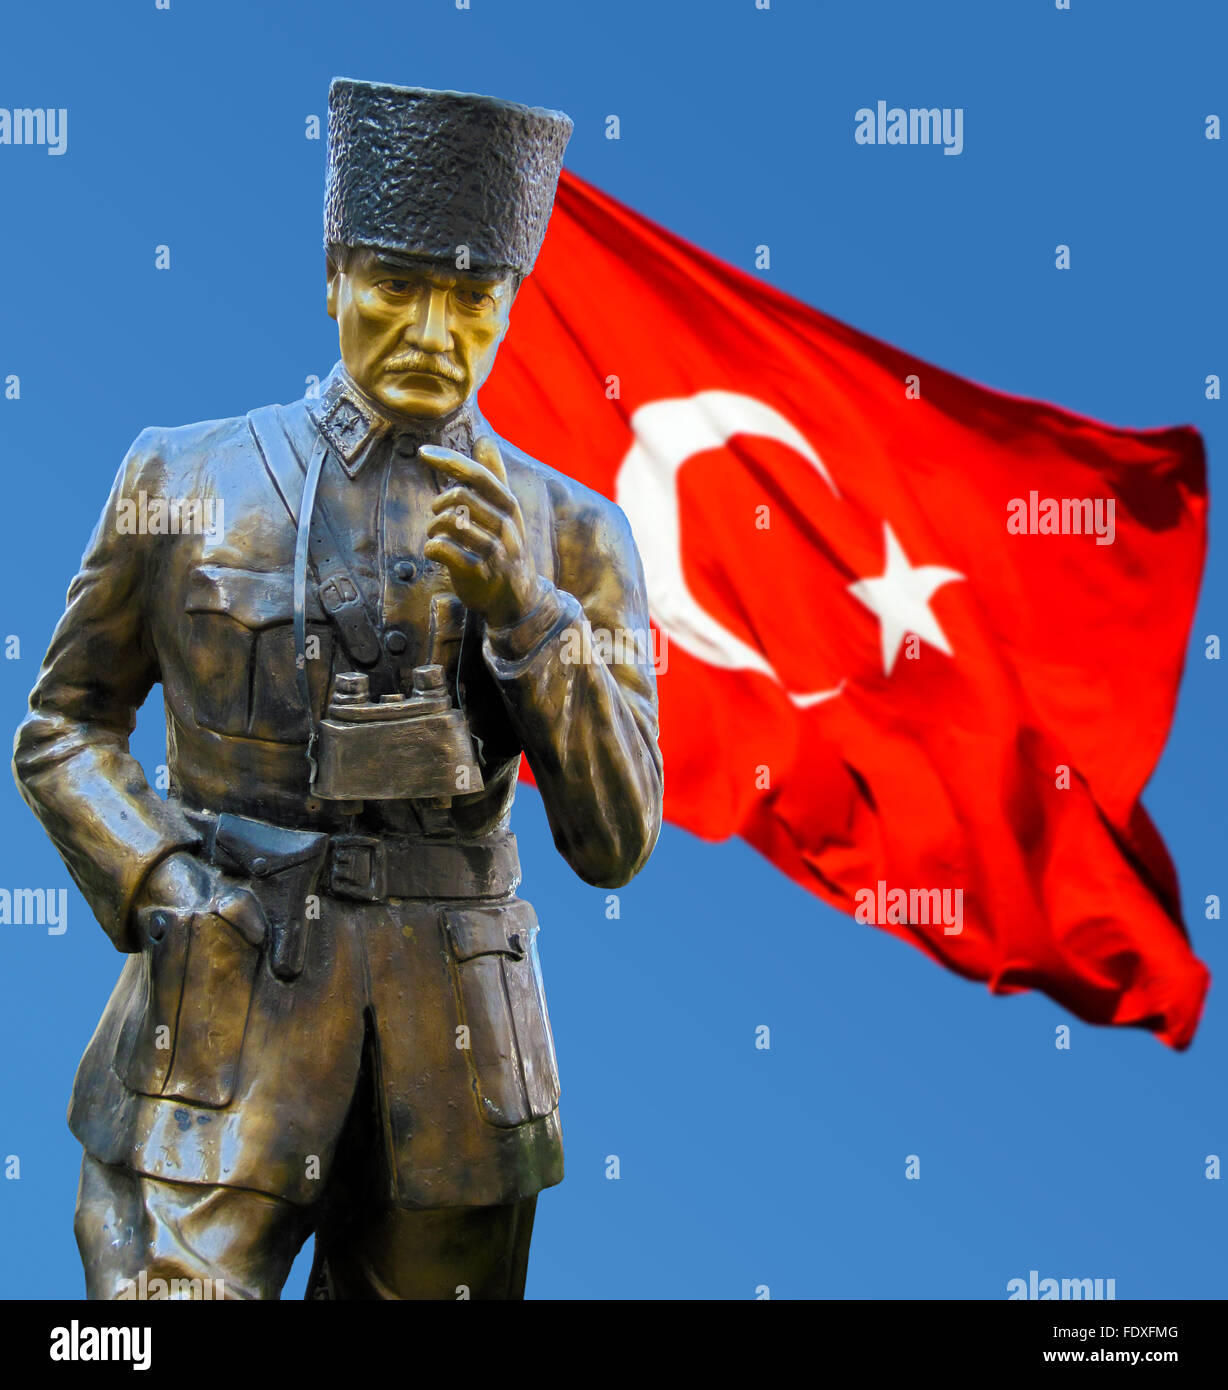 Statues of C Andranik Ozanian with red flag flying on blue back ground. Stock Photo